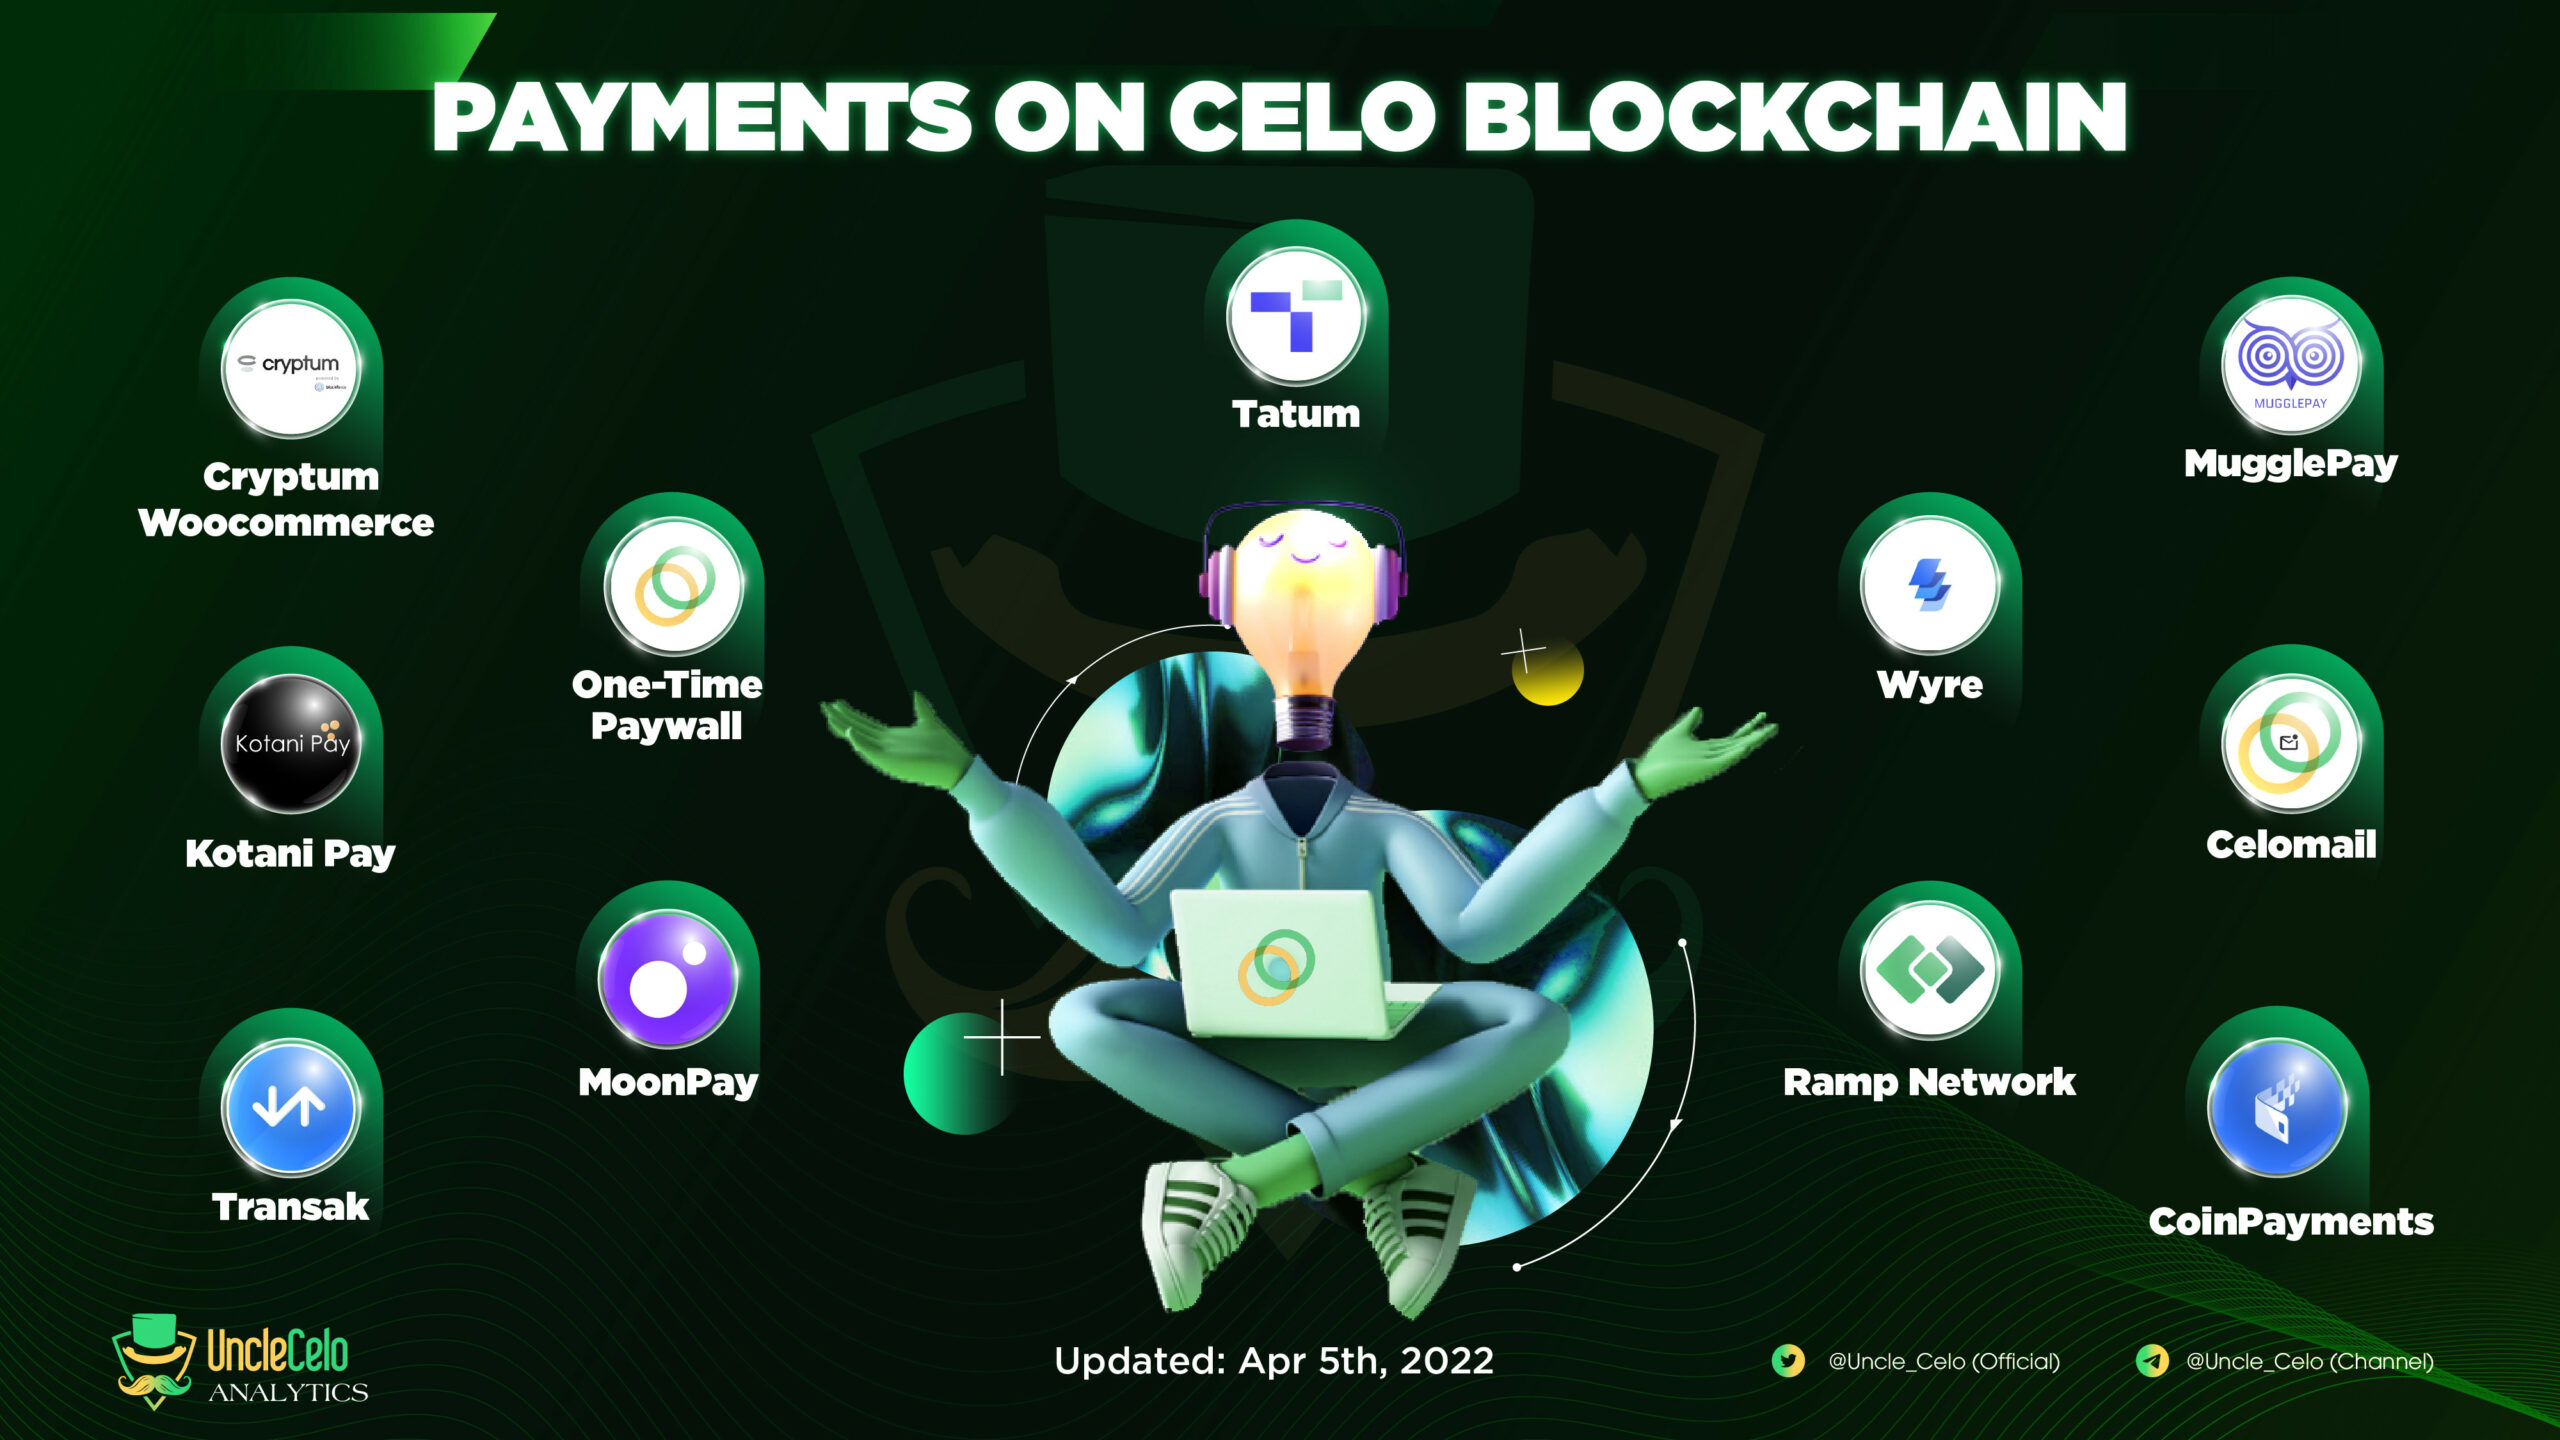 Payment on Celo